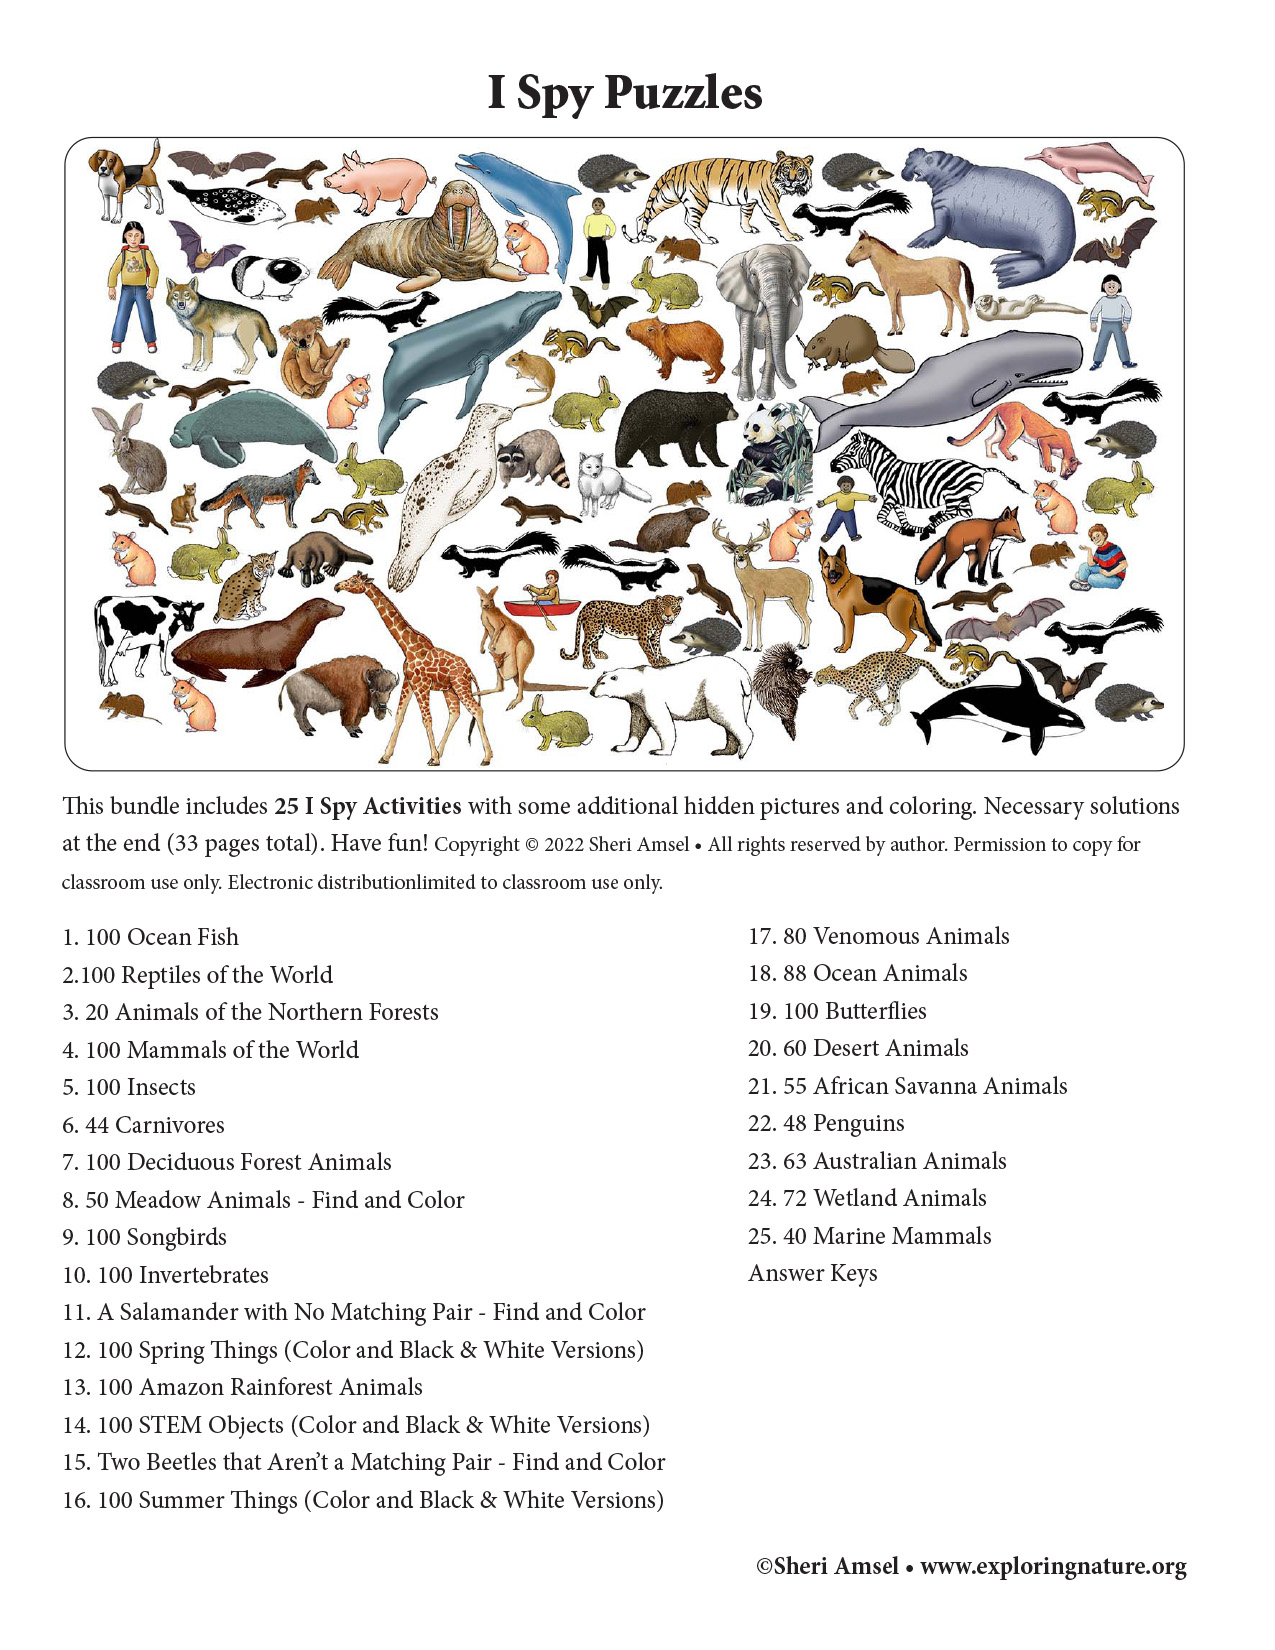 I Spy Bundle: Animals, Habitats, Seasons, and STEM Objects - Downloadable  Only